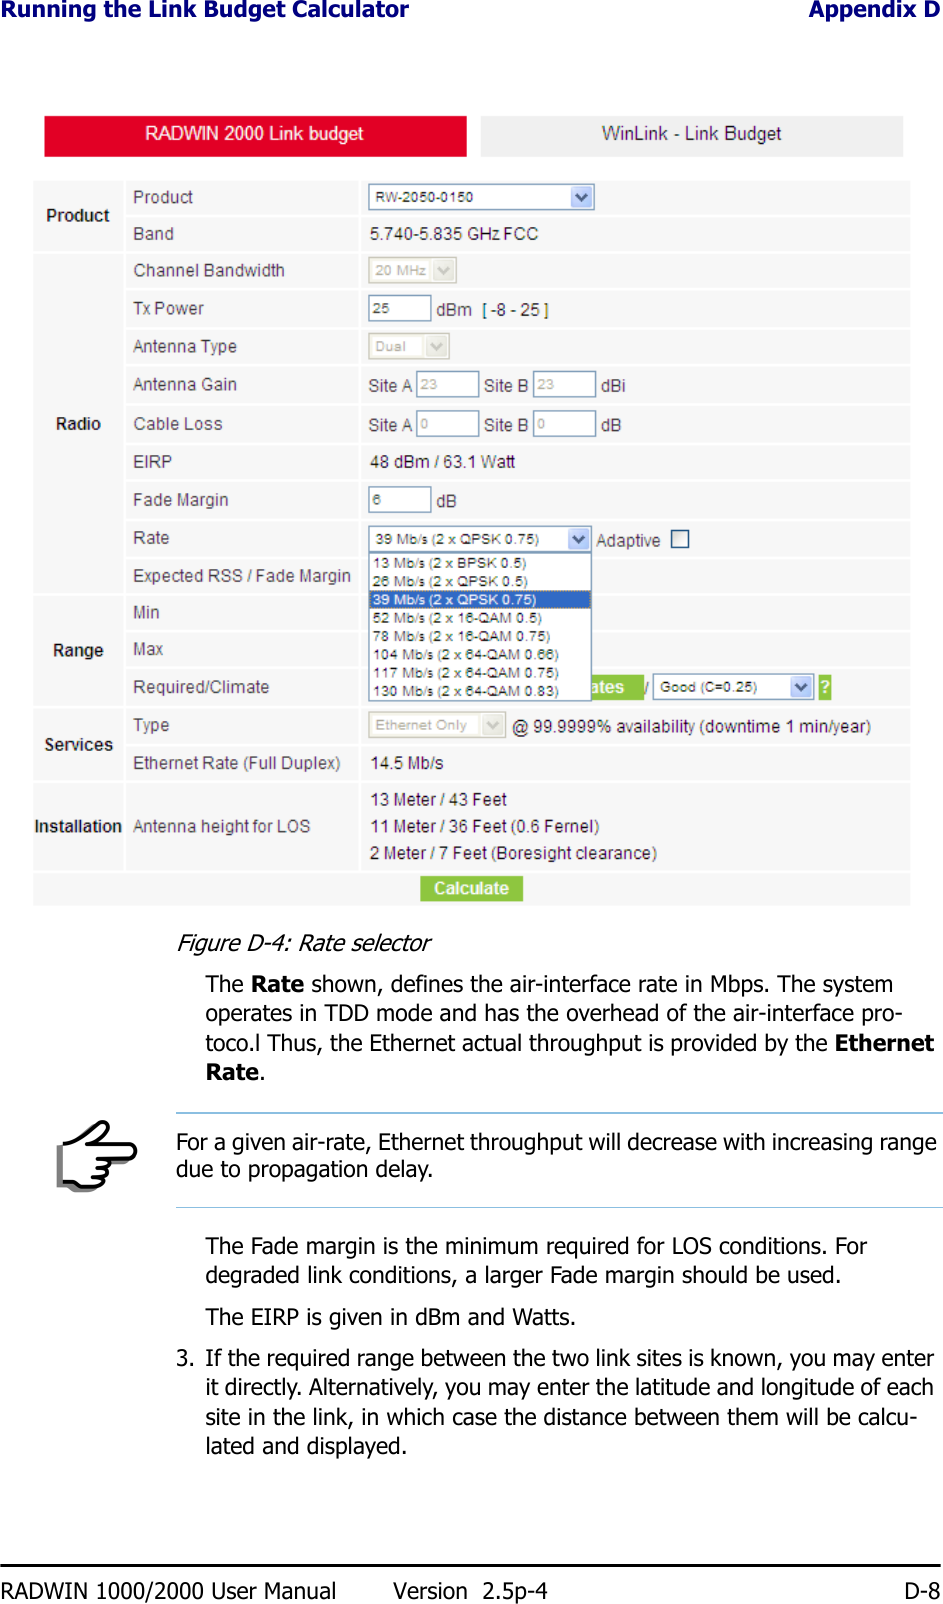 Running the Link Budget Calculator Appendix DRADWIN 1000/2000 User Manual Version  2.5p-4 D-8Figure D-4: Rate selectorThe Rate shown, defines the air-interface rate in Mbps. The system operates in TDD mode and has the overhead of the air-interface pro-toco.l Thus, the Ethernet actual throughput is provided by the Ethernet Rate.The Fade margin is the minimum required for LOS conditions. For degraded link conditions, a larger Fade margin should be used.The EIRP is given in dBm and Watts.3. If the required range between the two link sites is known, you may enter it directly. Alternatively, you may enter the latitude and longitude of each site in the link, in which case the distance between them will be calcu-lated and displayed.NoteFor a given air-rate, Ethernet throughput will decrease with increasing range due to propagation delay.